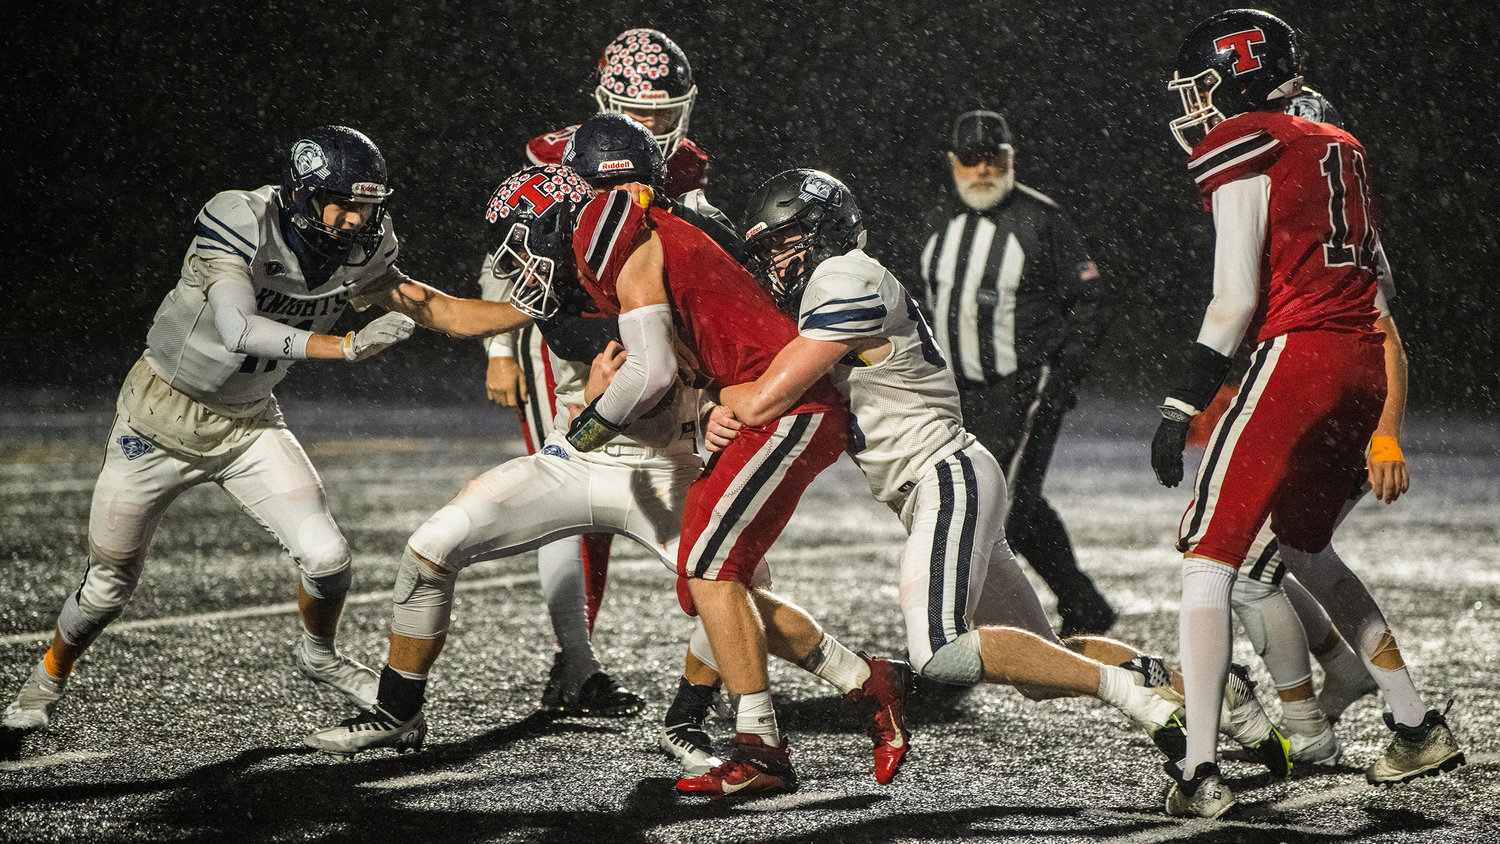 Tenino sophomore Austin Gonia (2) runs with the football Friday night at Beaver Stadium during a game against the King’s Way Christian Knights.